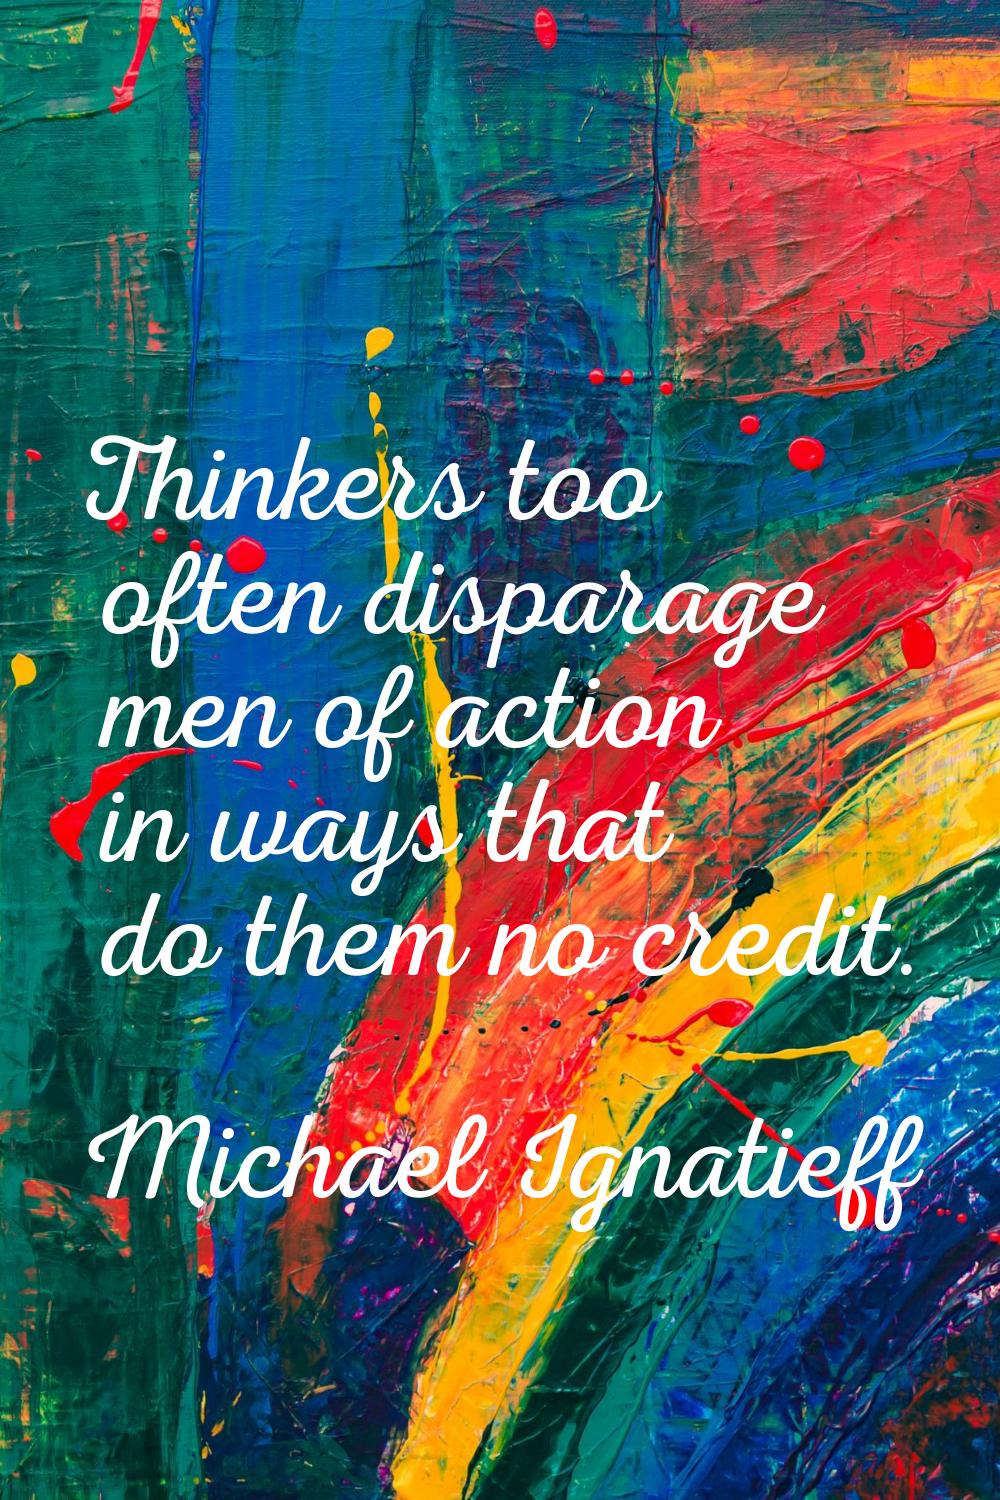 Thinkers too often disparage men of action in ways that do them no credit.